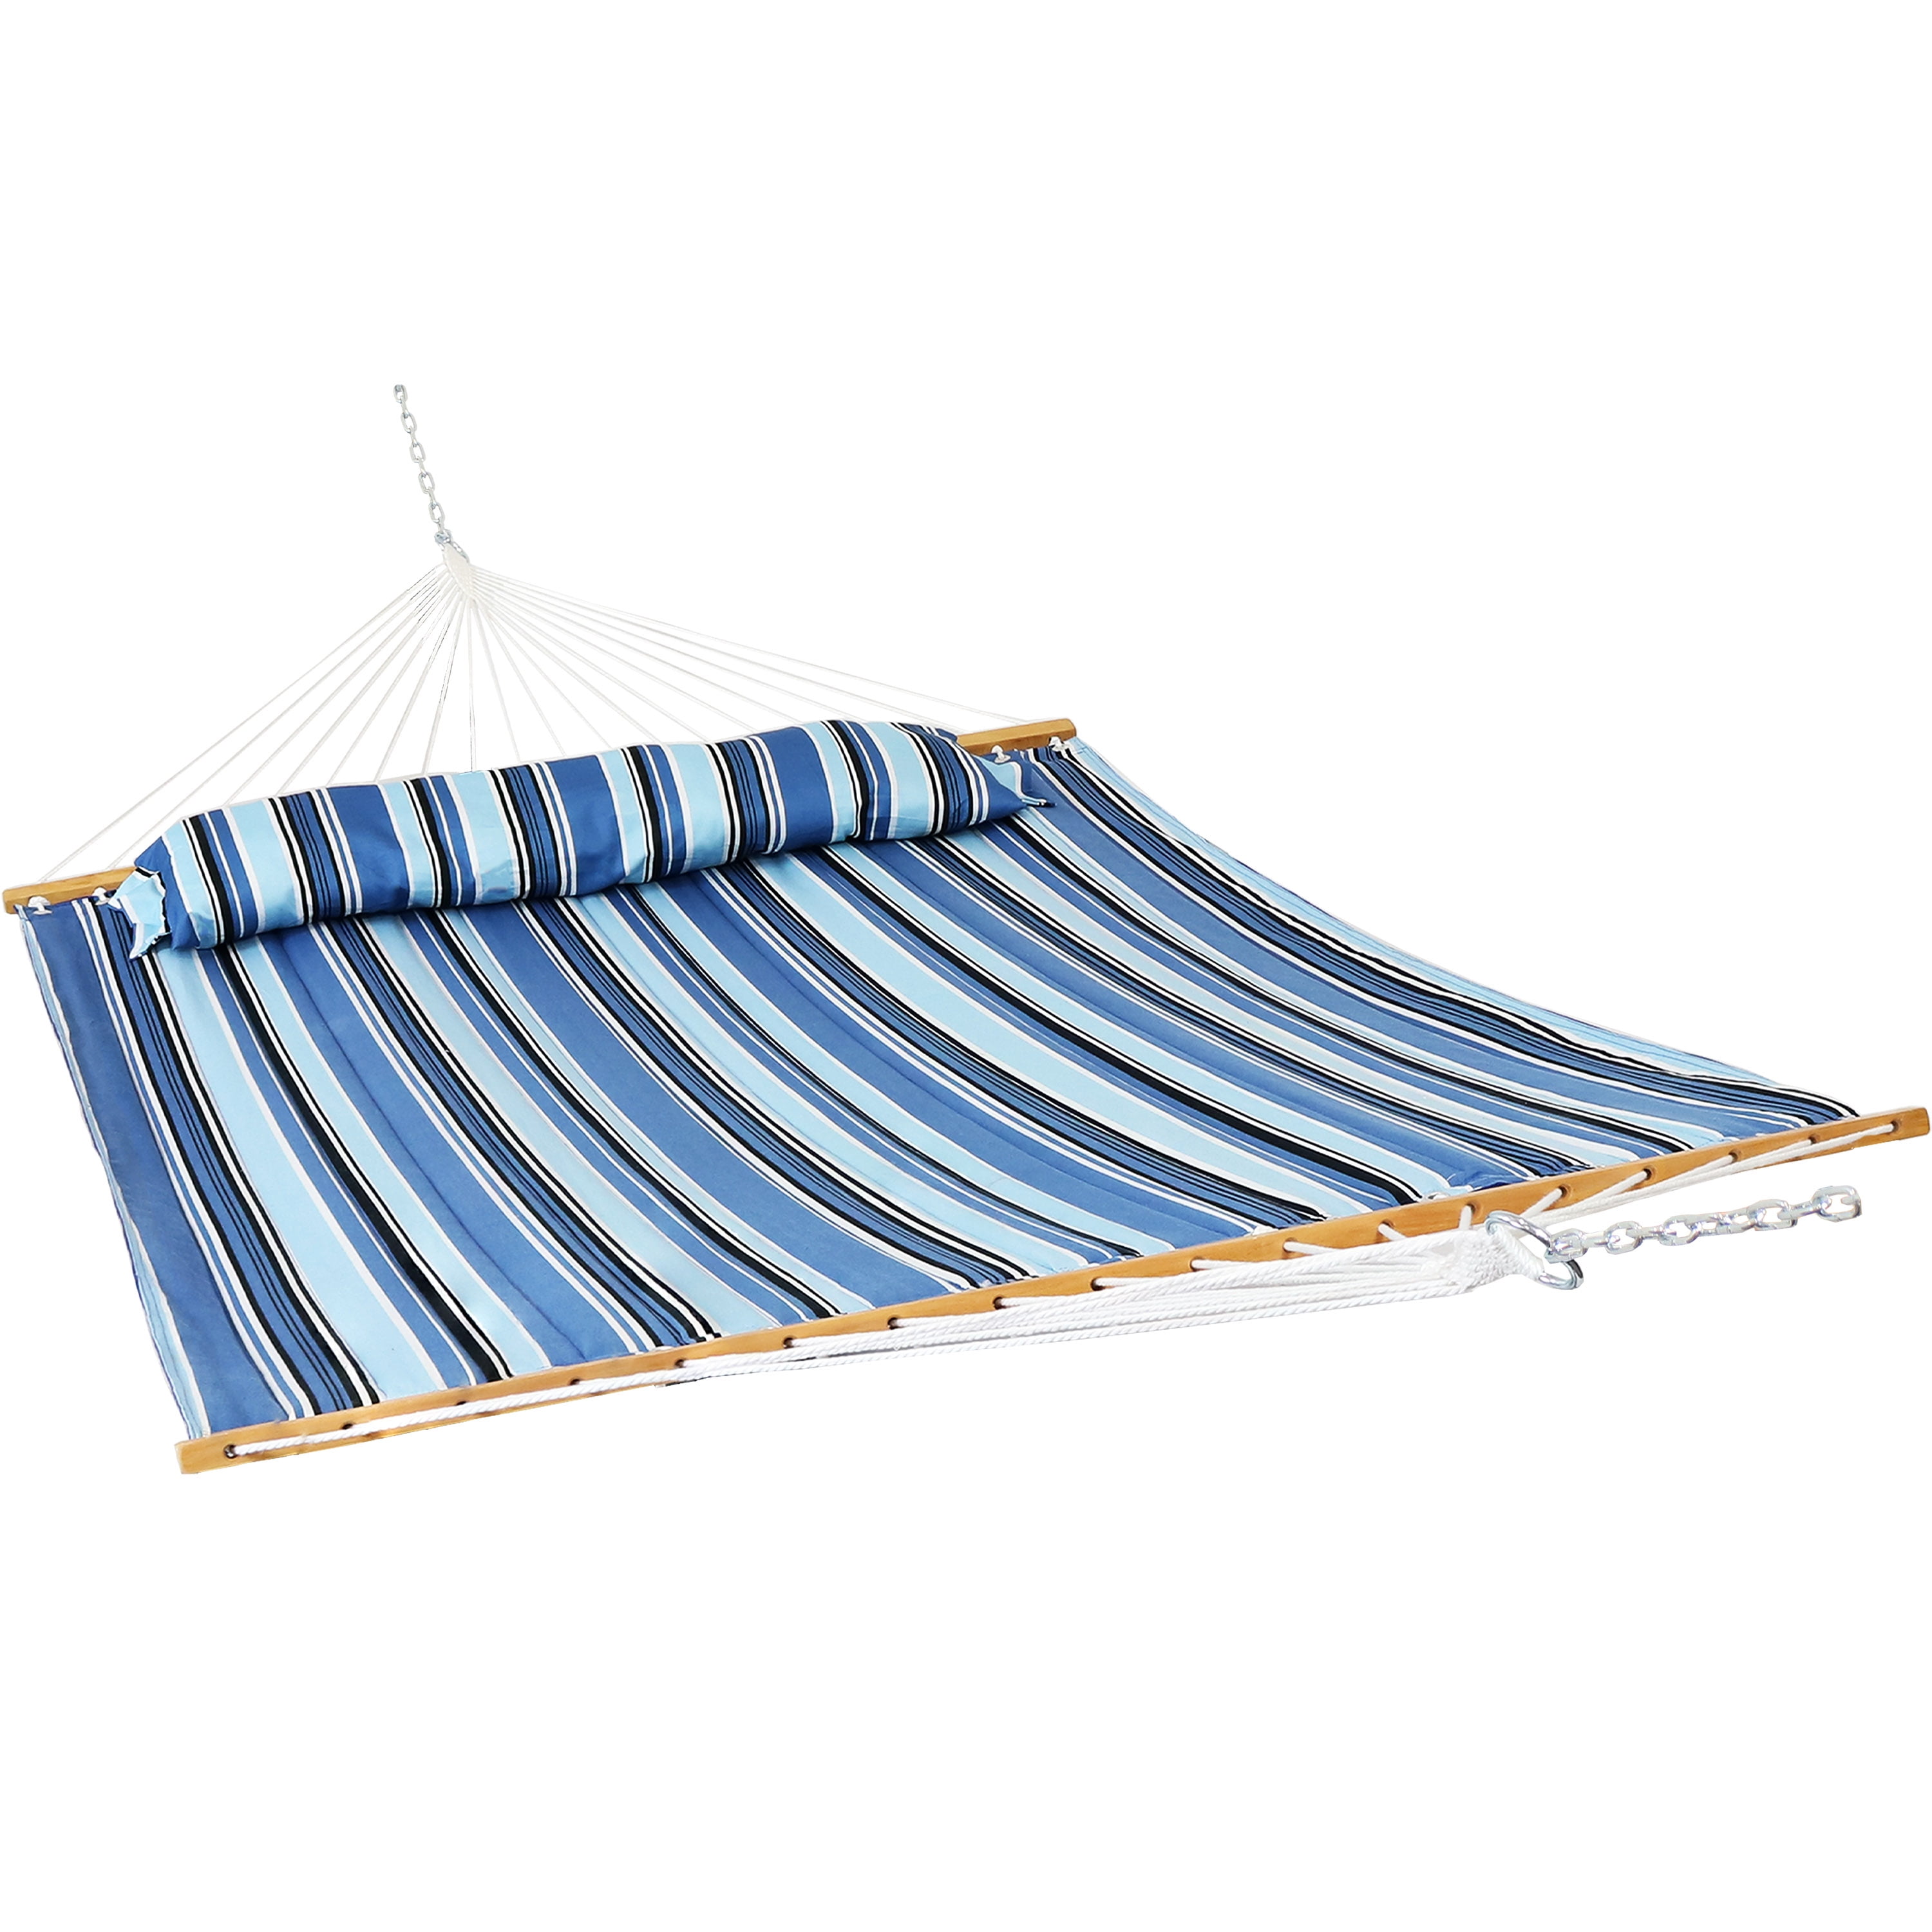 Unfinished Wood Spreader Bars Sunnydaze Cotton Rope Hammock with Stand 